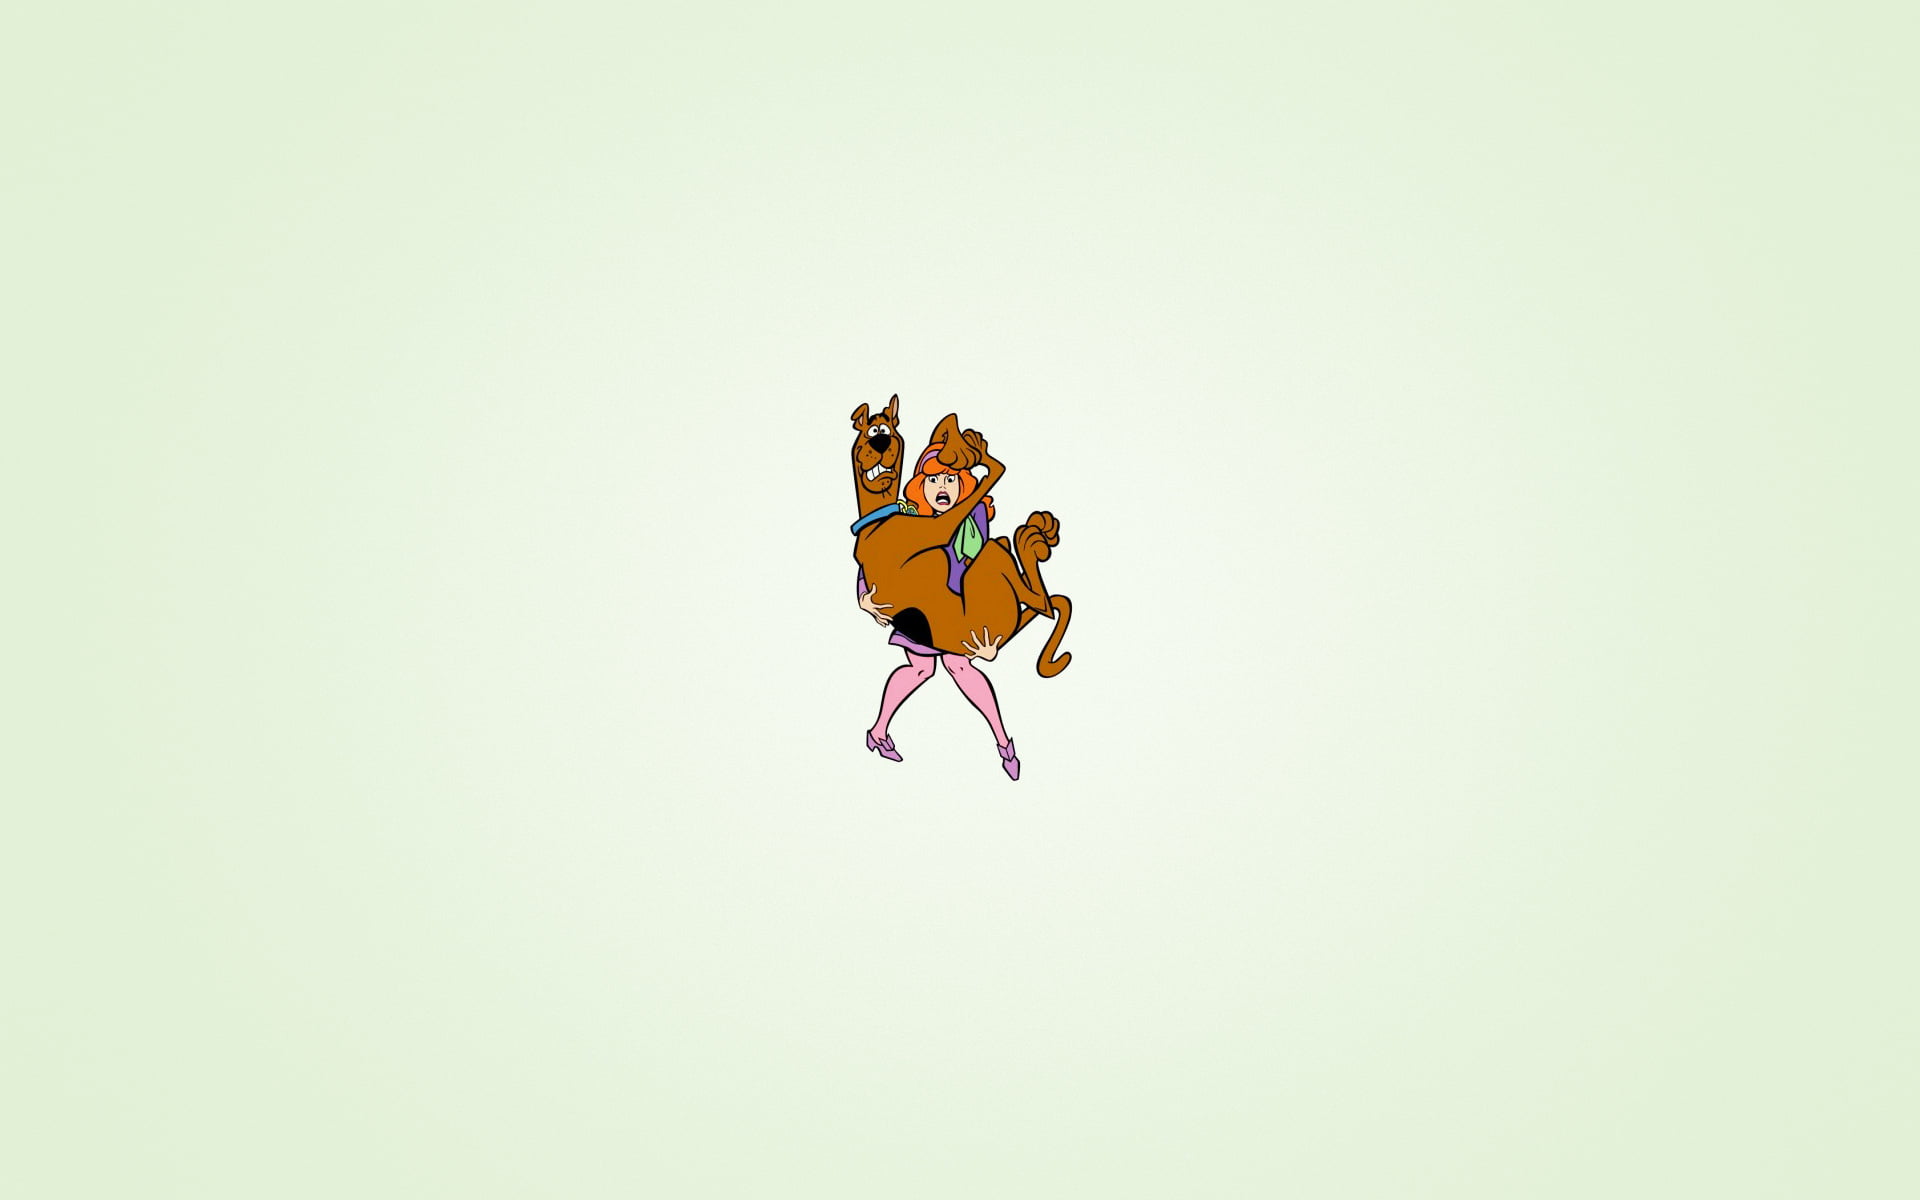 Wallpaper / Activity, Character, Outdoors, Mid Air, Fun, Minimalism, Scooby, Humor, Scooby Doo, Daphne, Copy Space, Leisure Activity, Day, 1080P, Doo, Enjoyment, Vitality Free Download